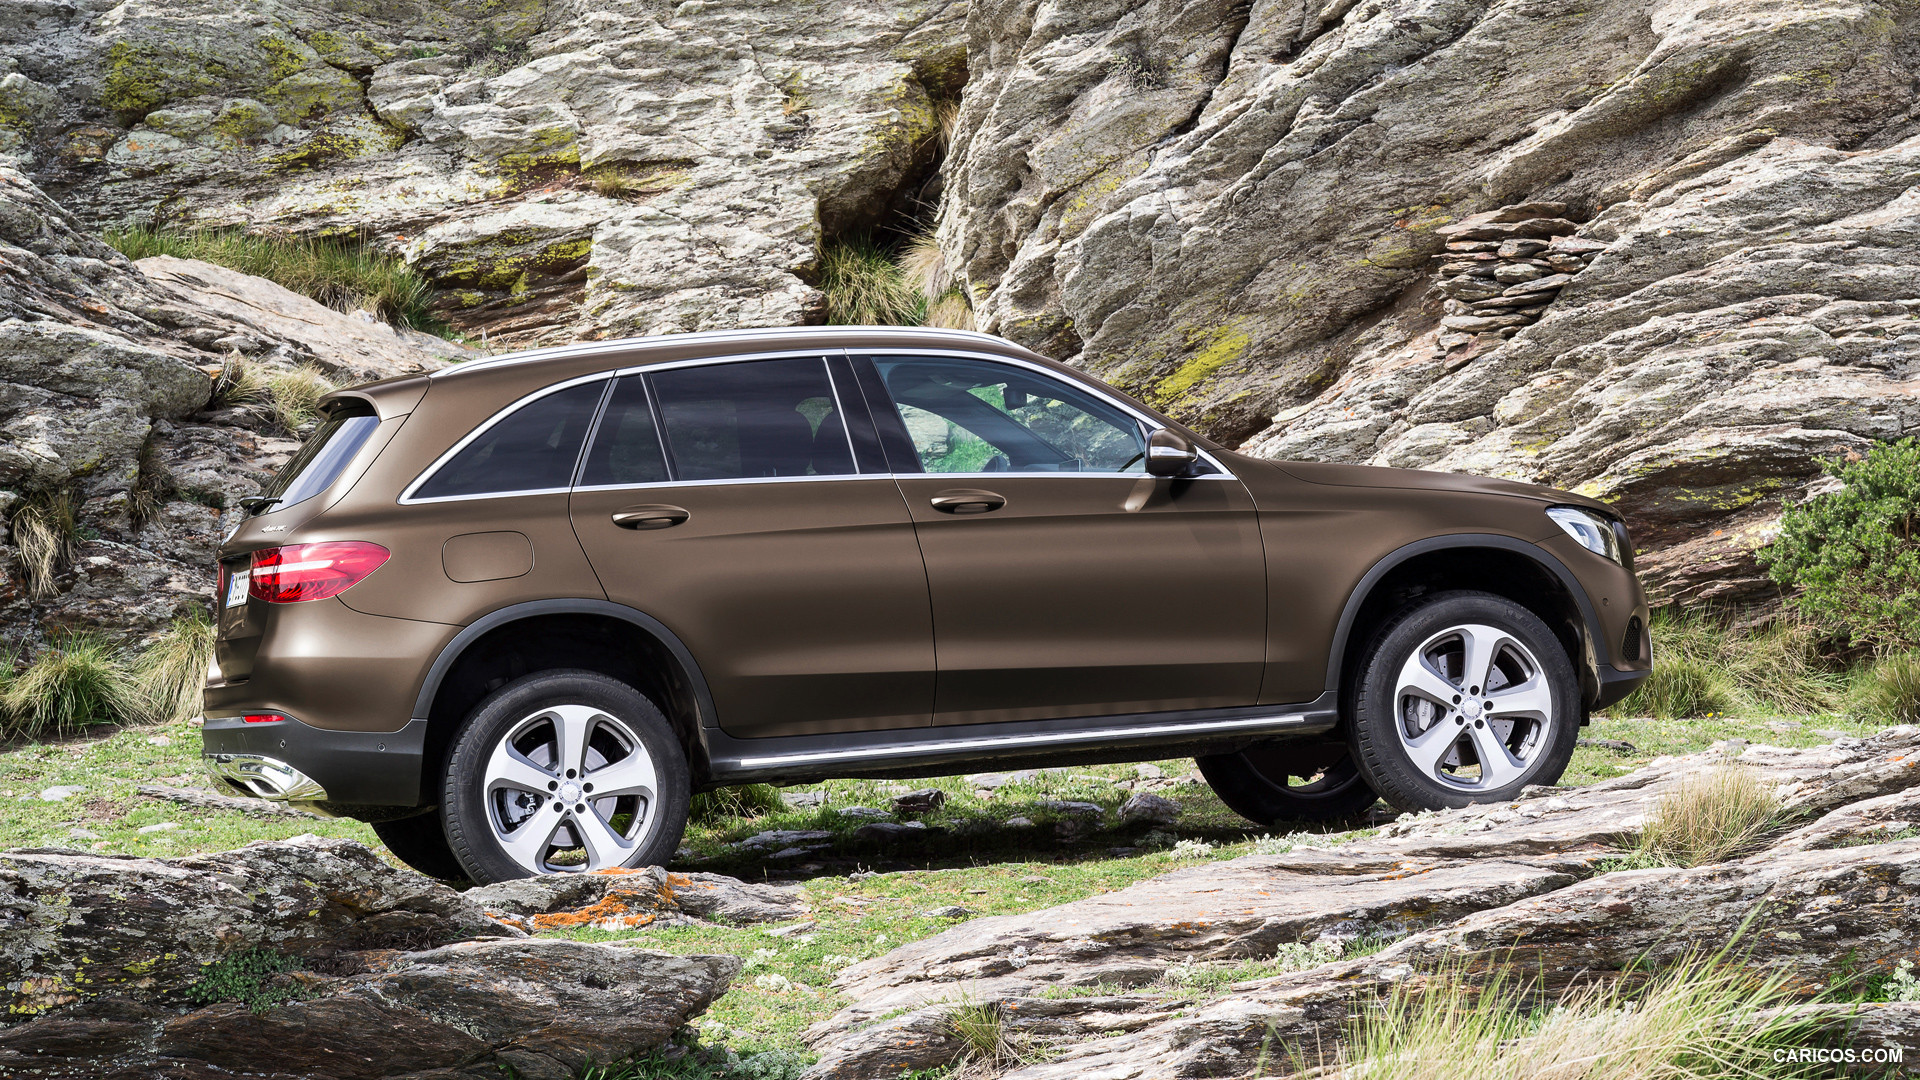 2016 Mercedes-Benz GLC-Class GLC 250d 4MATIC (Citrine Brown Magno, Offroad Line) - Side, #25 of 254